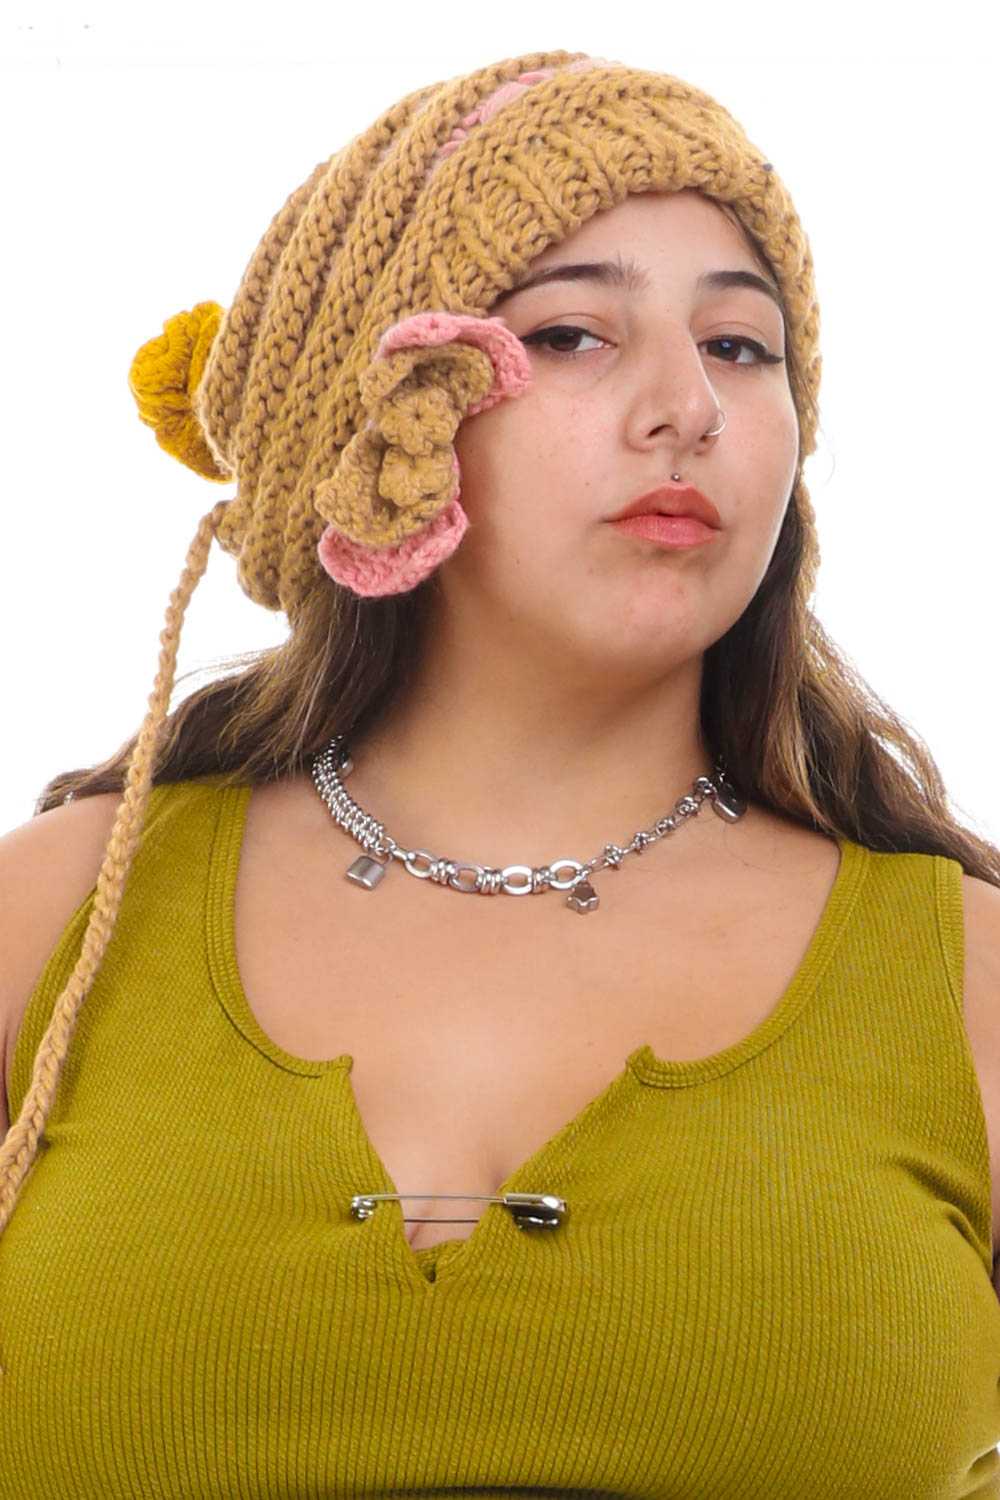 Vintage Flower Power Knitted Beanie - image 2